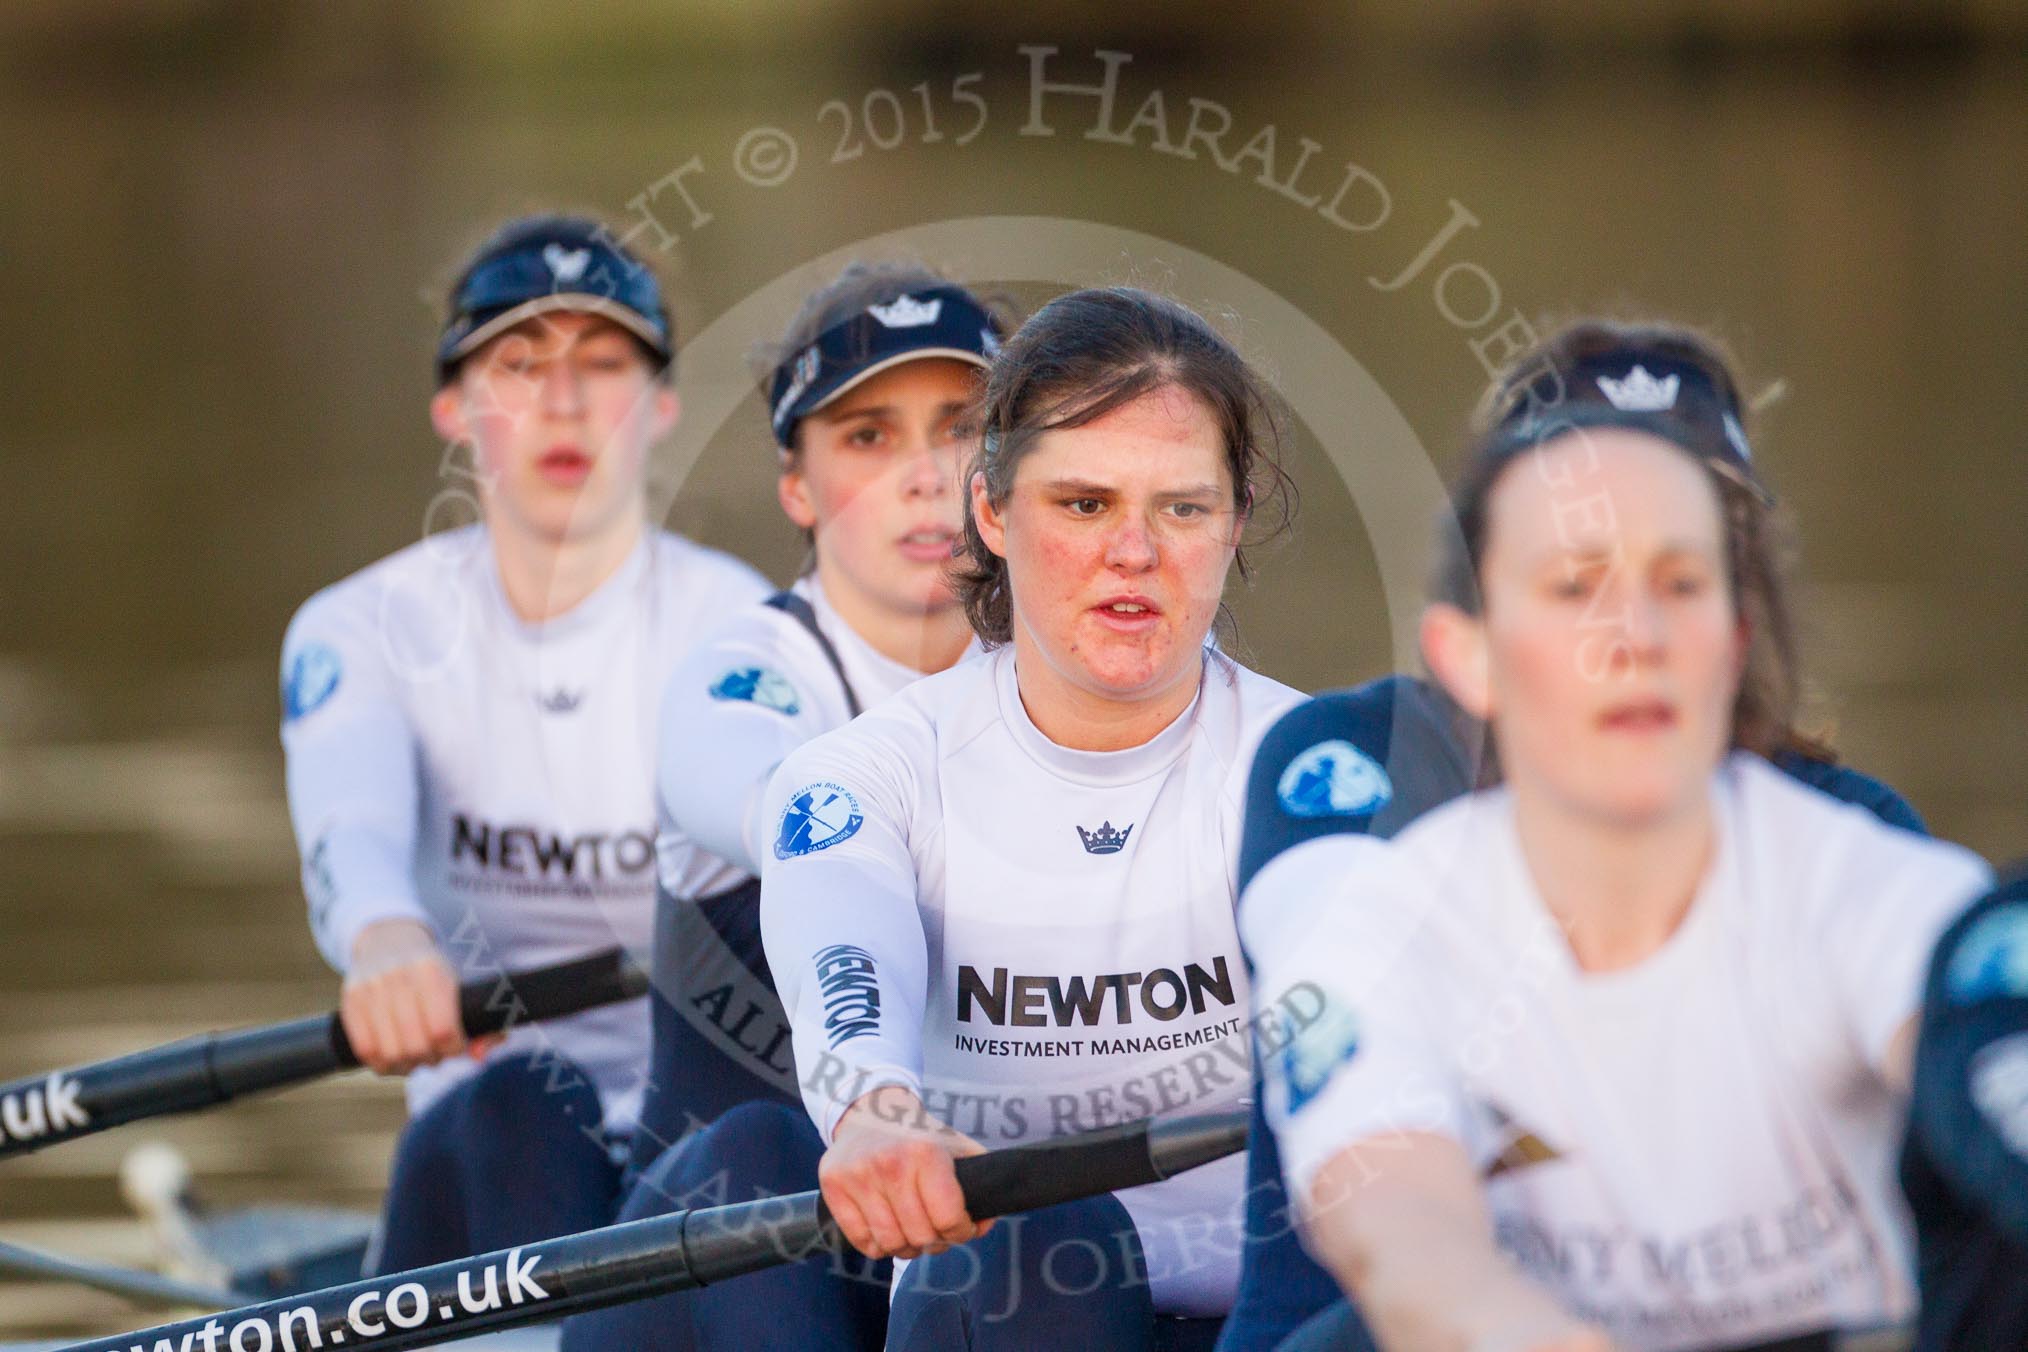 The Boat Race season 2015: OUWBC training Wallingford.

Wallingford,

United Kingdom,
on 04 March 2015 at 17:41, image #371